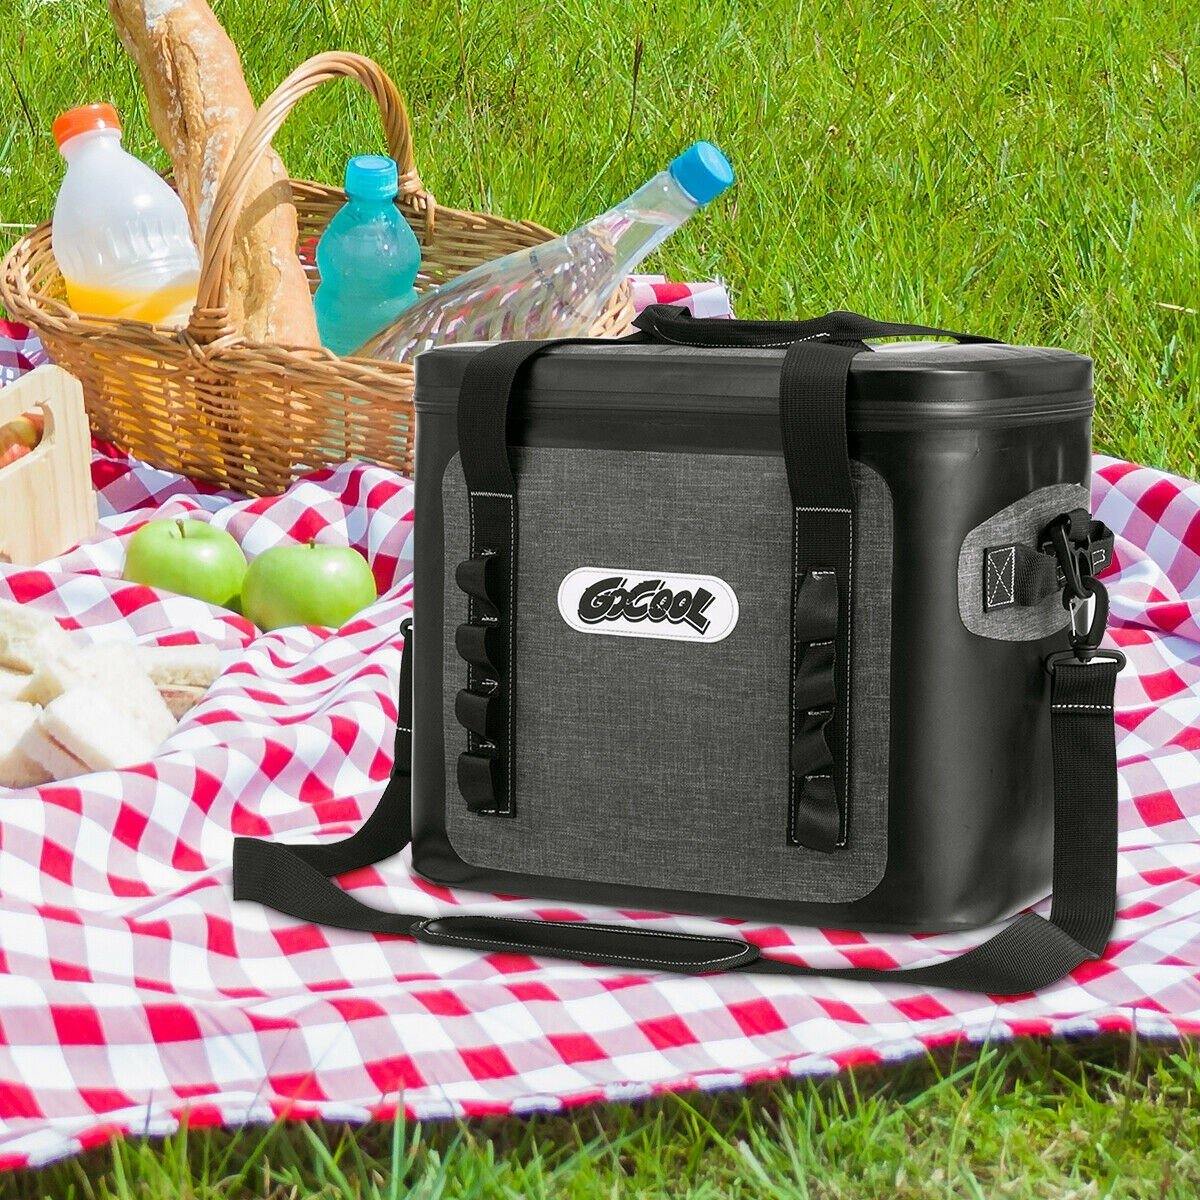 Ovente Portable Outdoor Personal Ice Chest Insulated Cooler Box 6 Quart,  Easy Travel Storage Lunchbox with